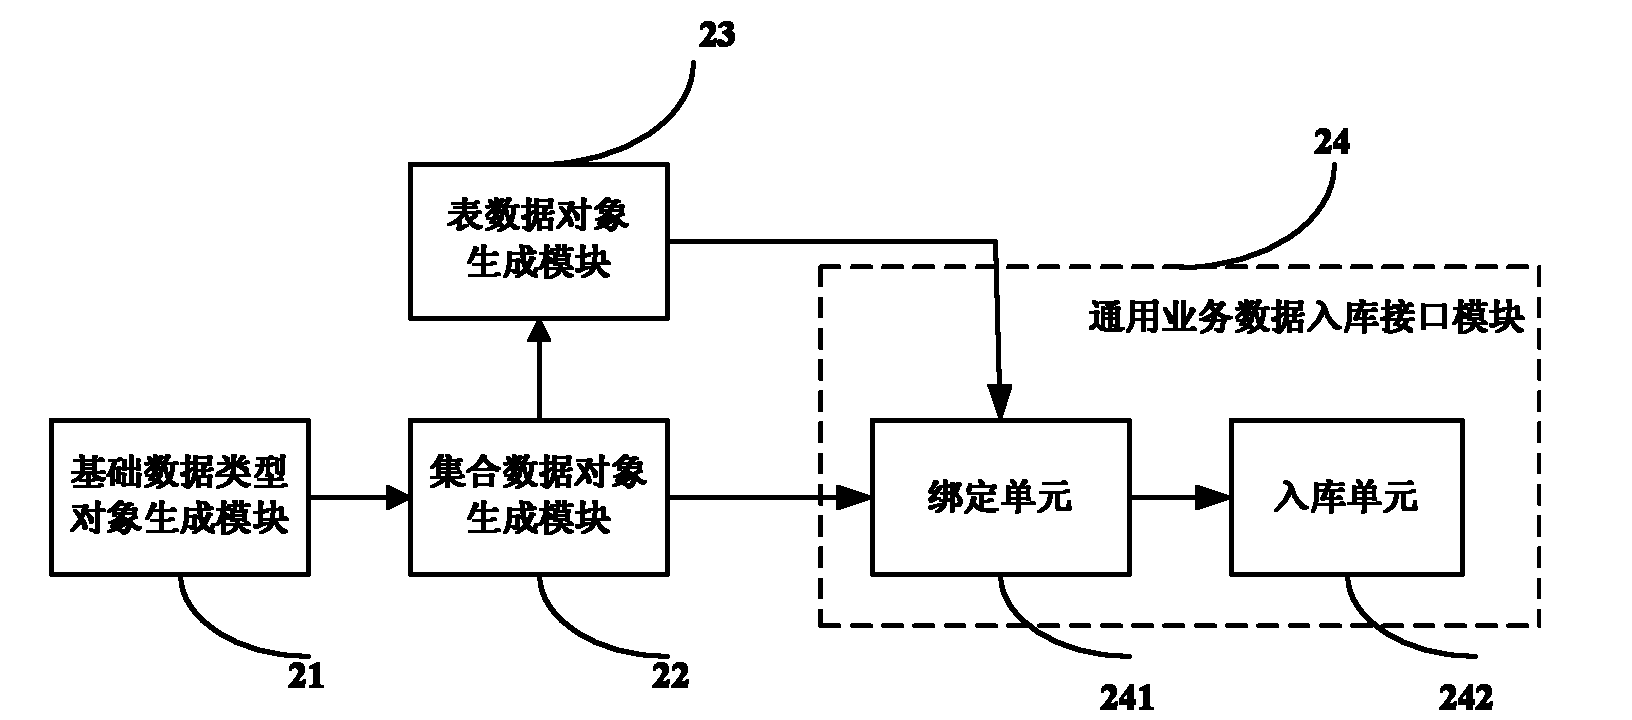 Method and device for quickly putting service data into base